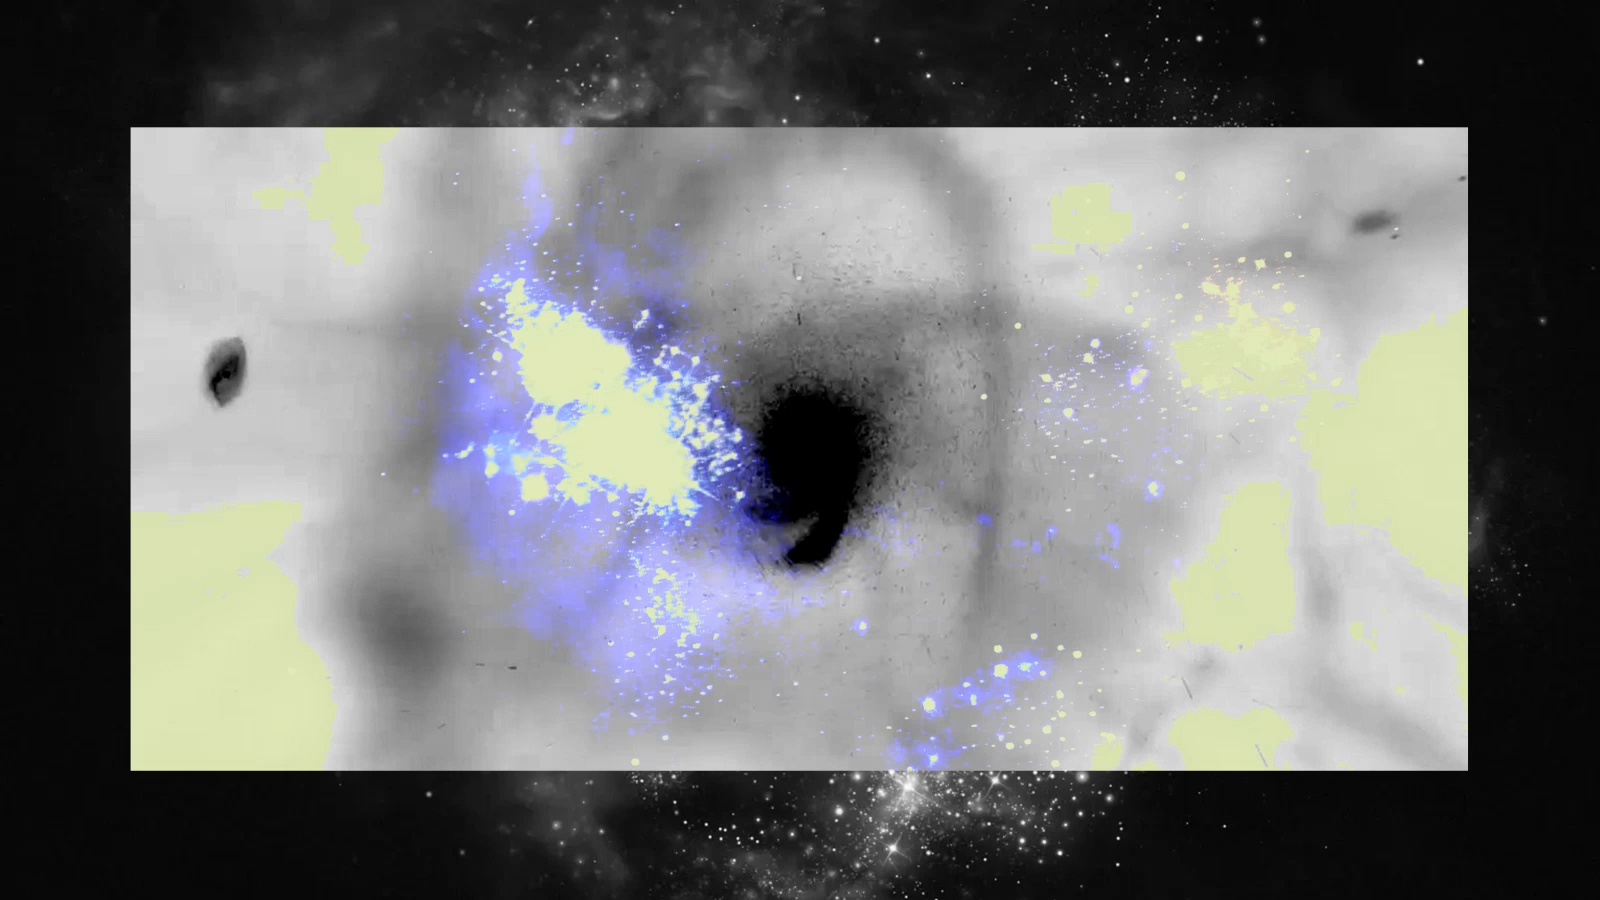 A digitally rendered image of a black hole with surrounding accretion disk and stars, depicting the era of the first galaxies.